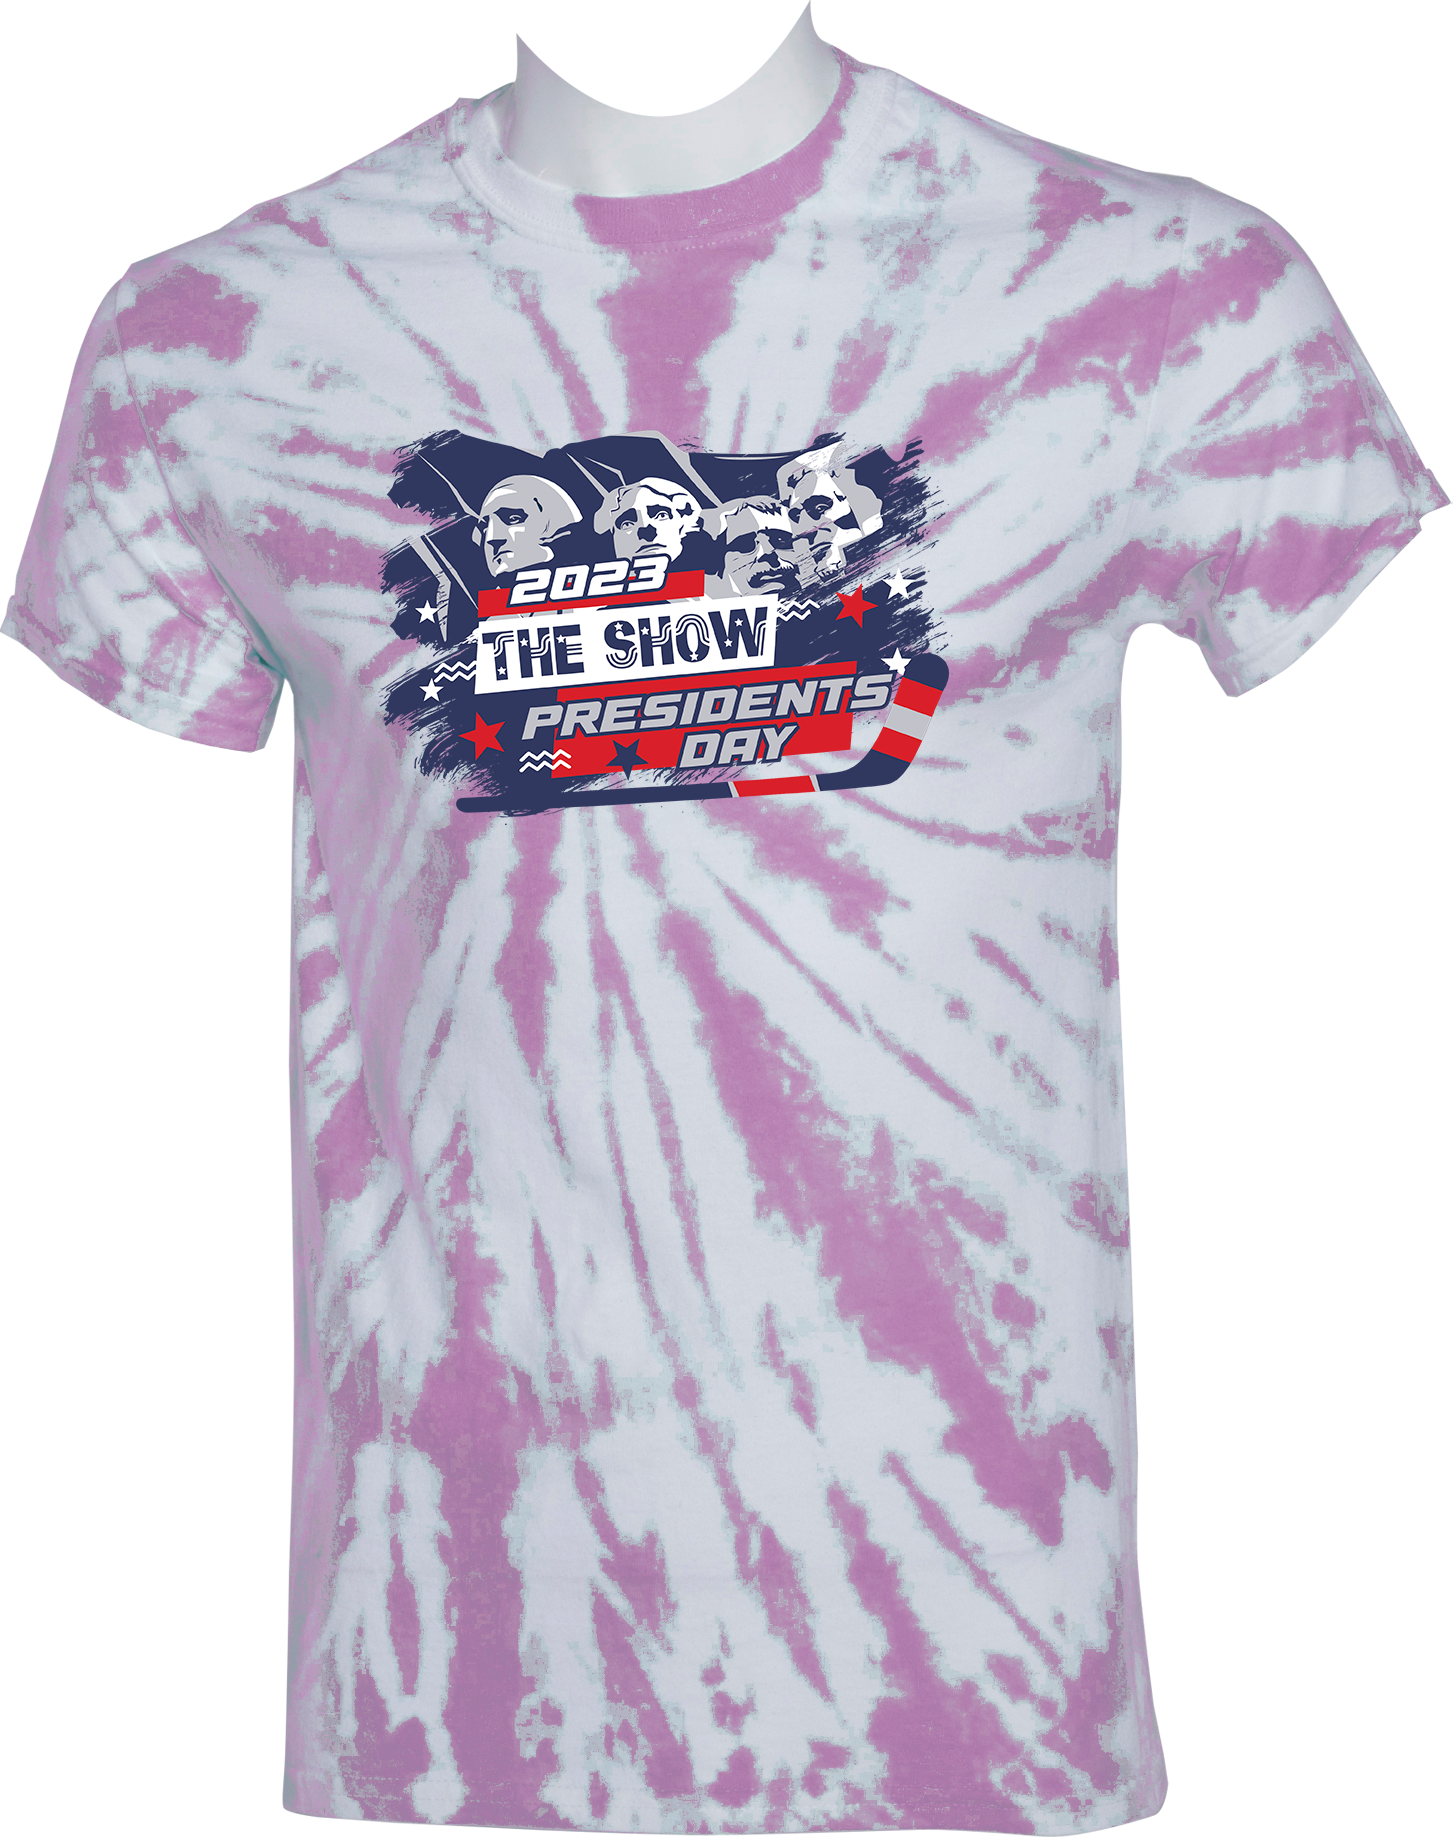 TIE-DYE SHORT SLEEVES - 2023 The Show President's Day